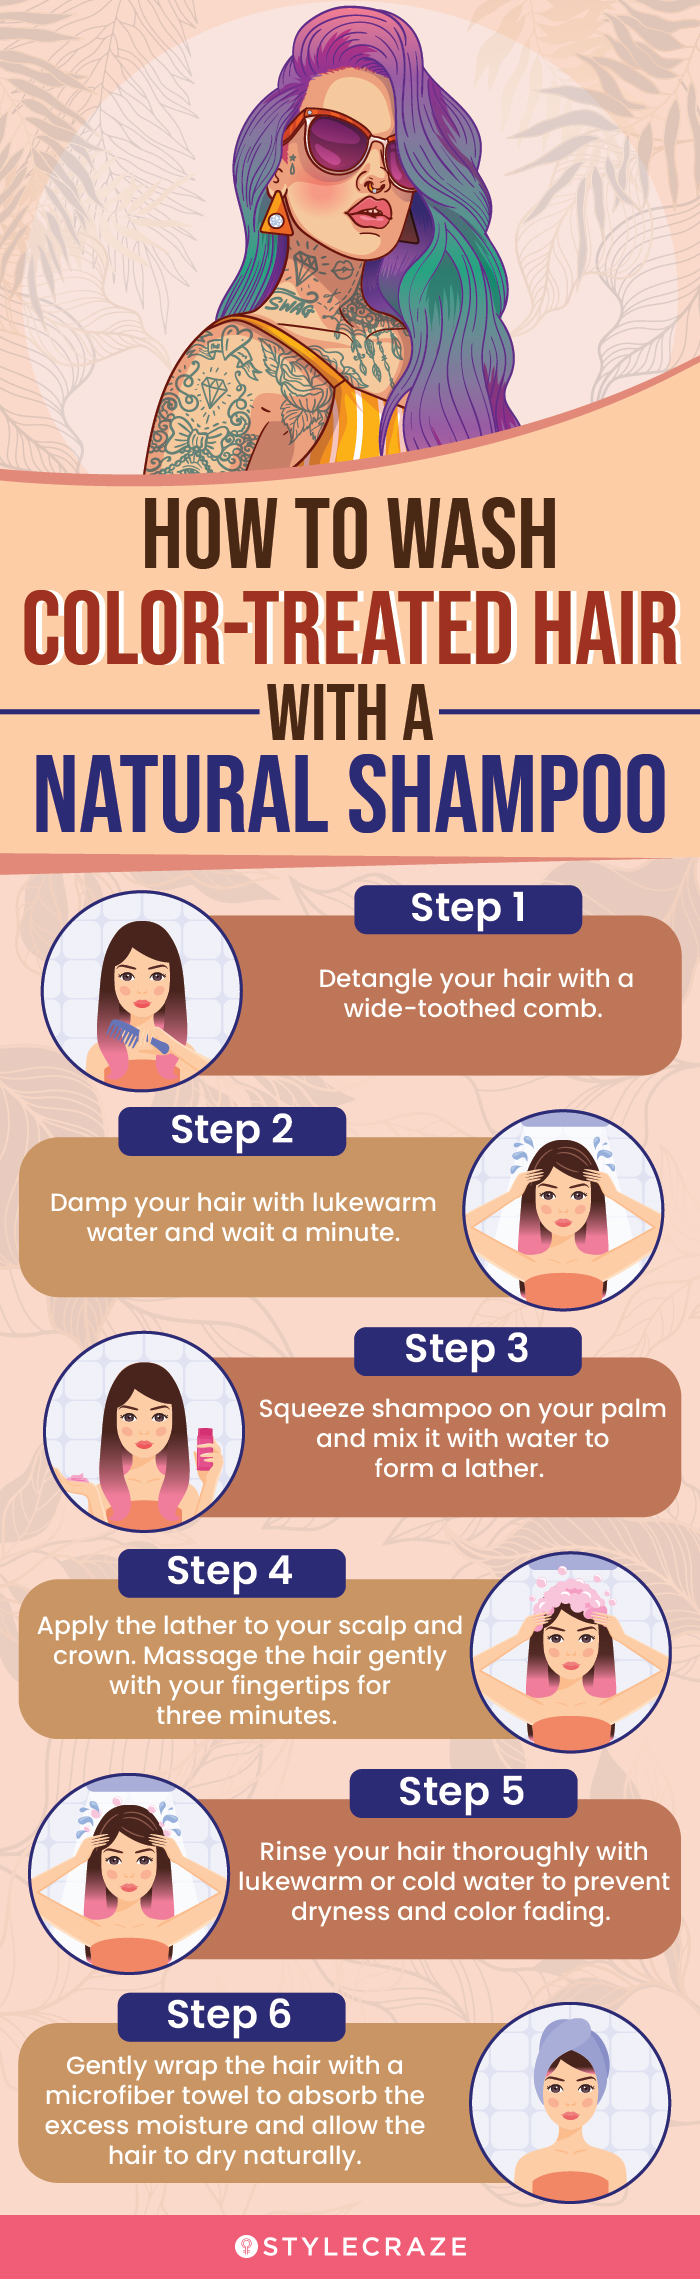 How To Wash Color-Treated Hair With A Natural Shampoo (infographic)